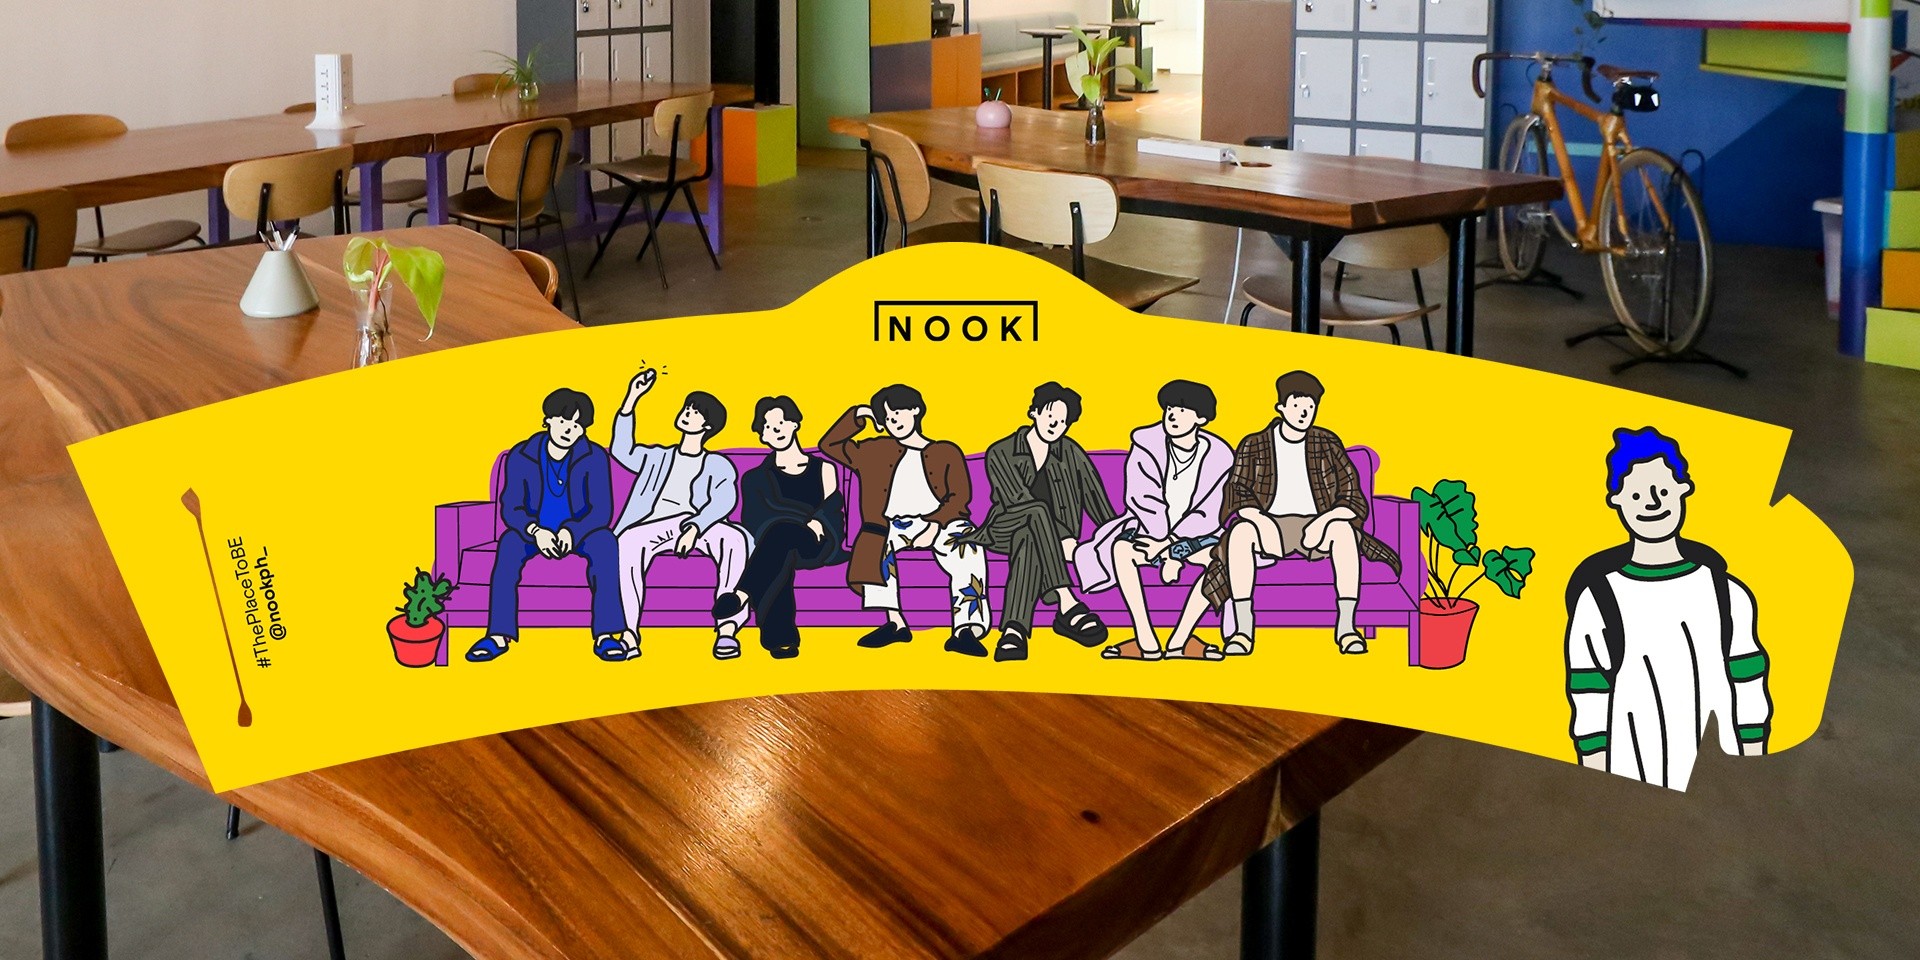 NOOK Coworking Studio is throwing a listening party for BTS' new album, BE